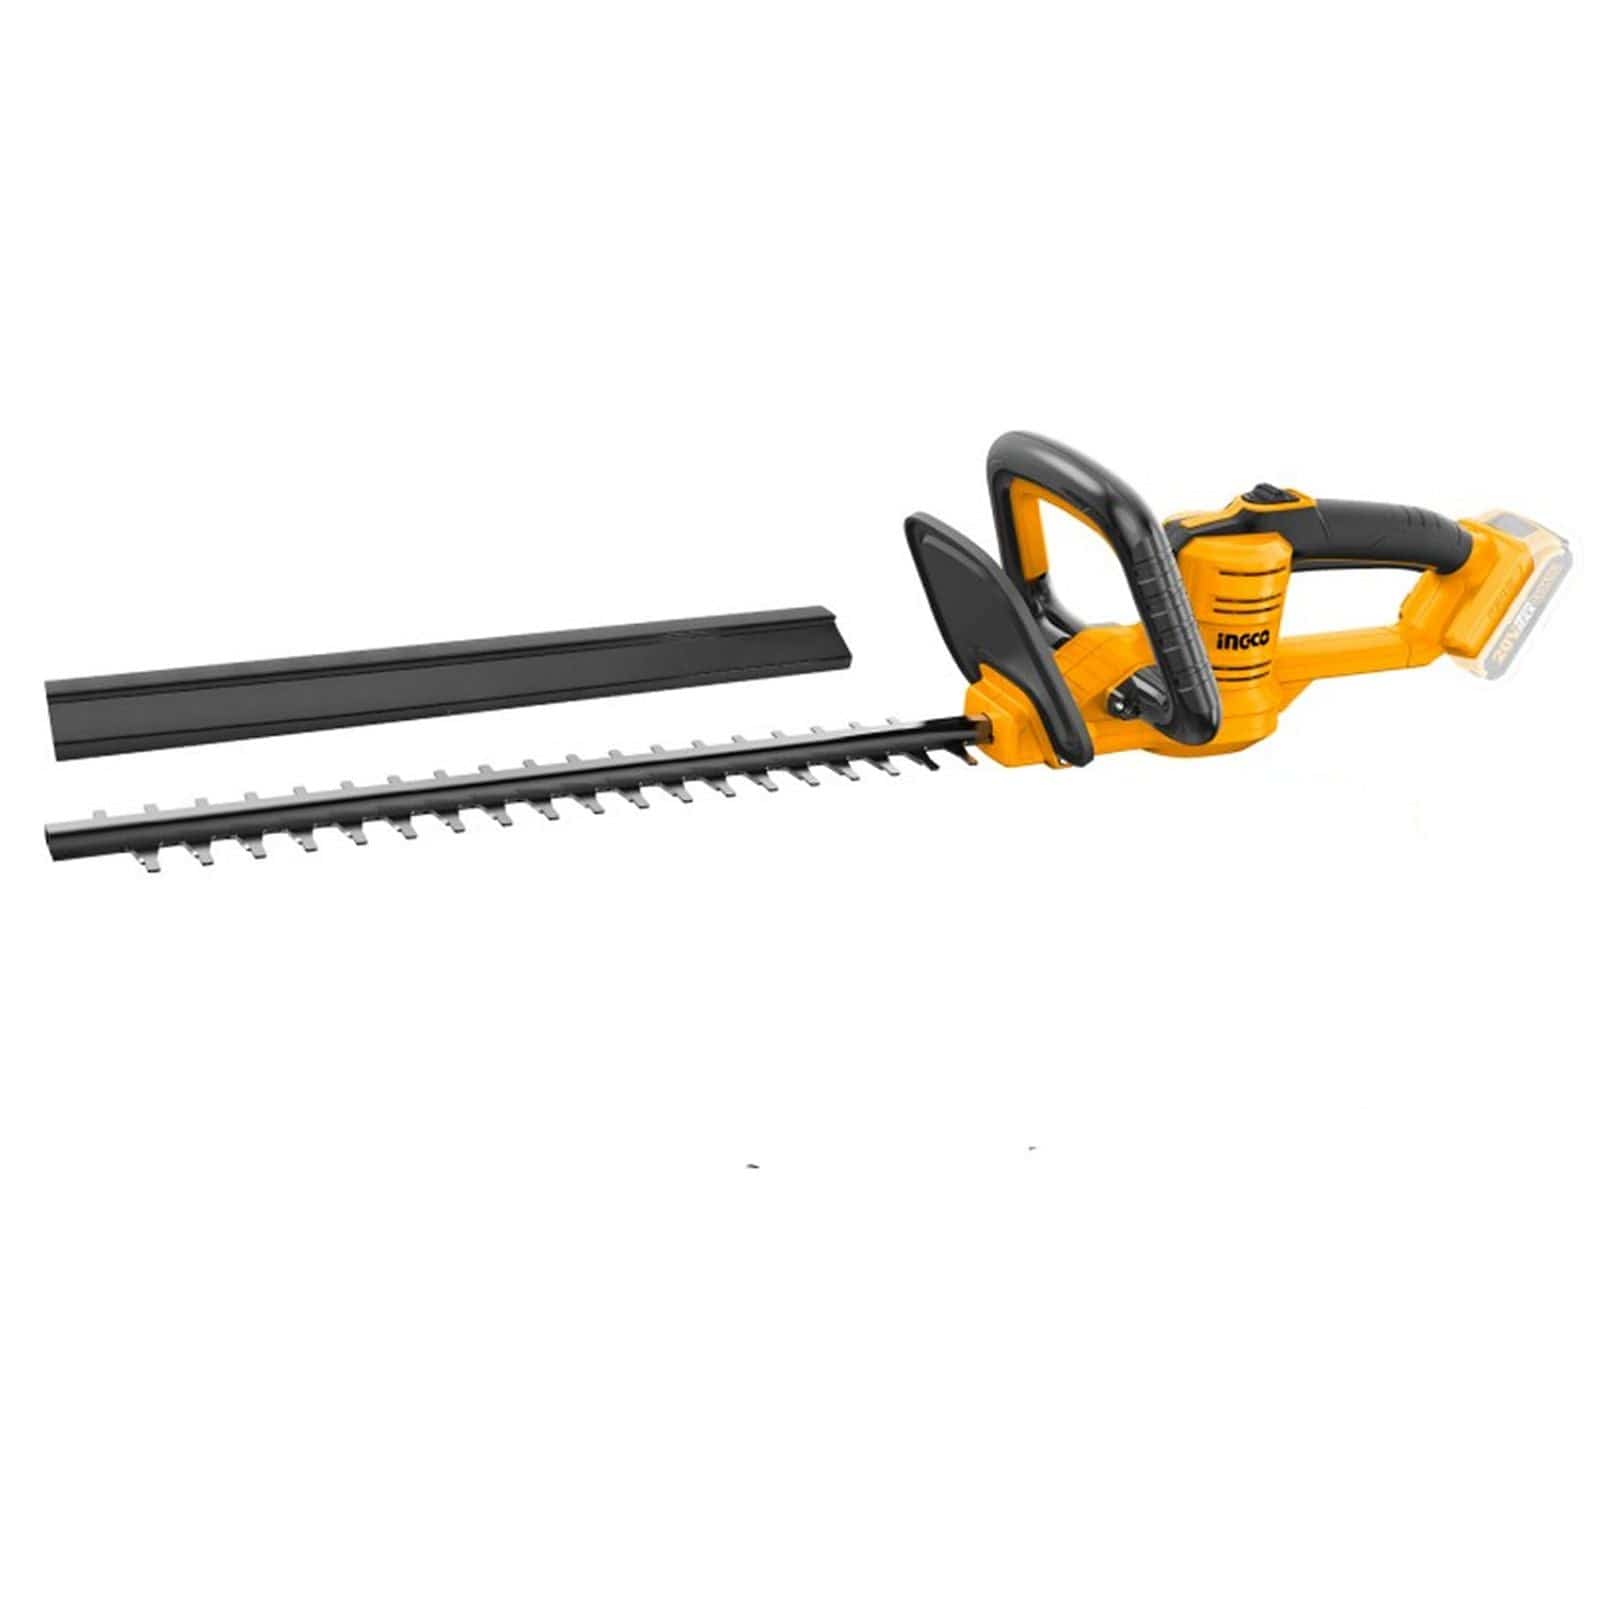 Ingco Lithium-Ion Cordless Hedge Trimmer - CHTLI20018 | Supply Master | Accra, Ghana Trimmer Buy Tools hardware Building materials